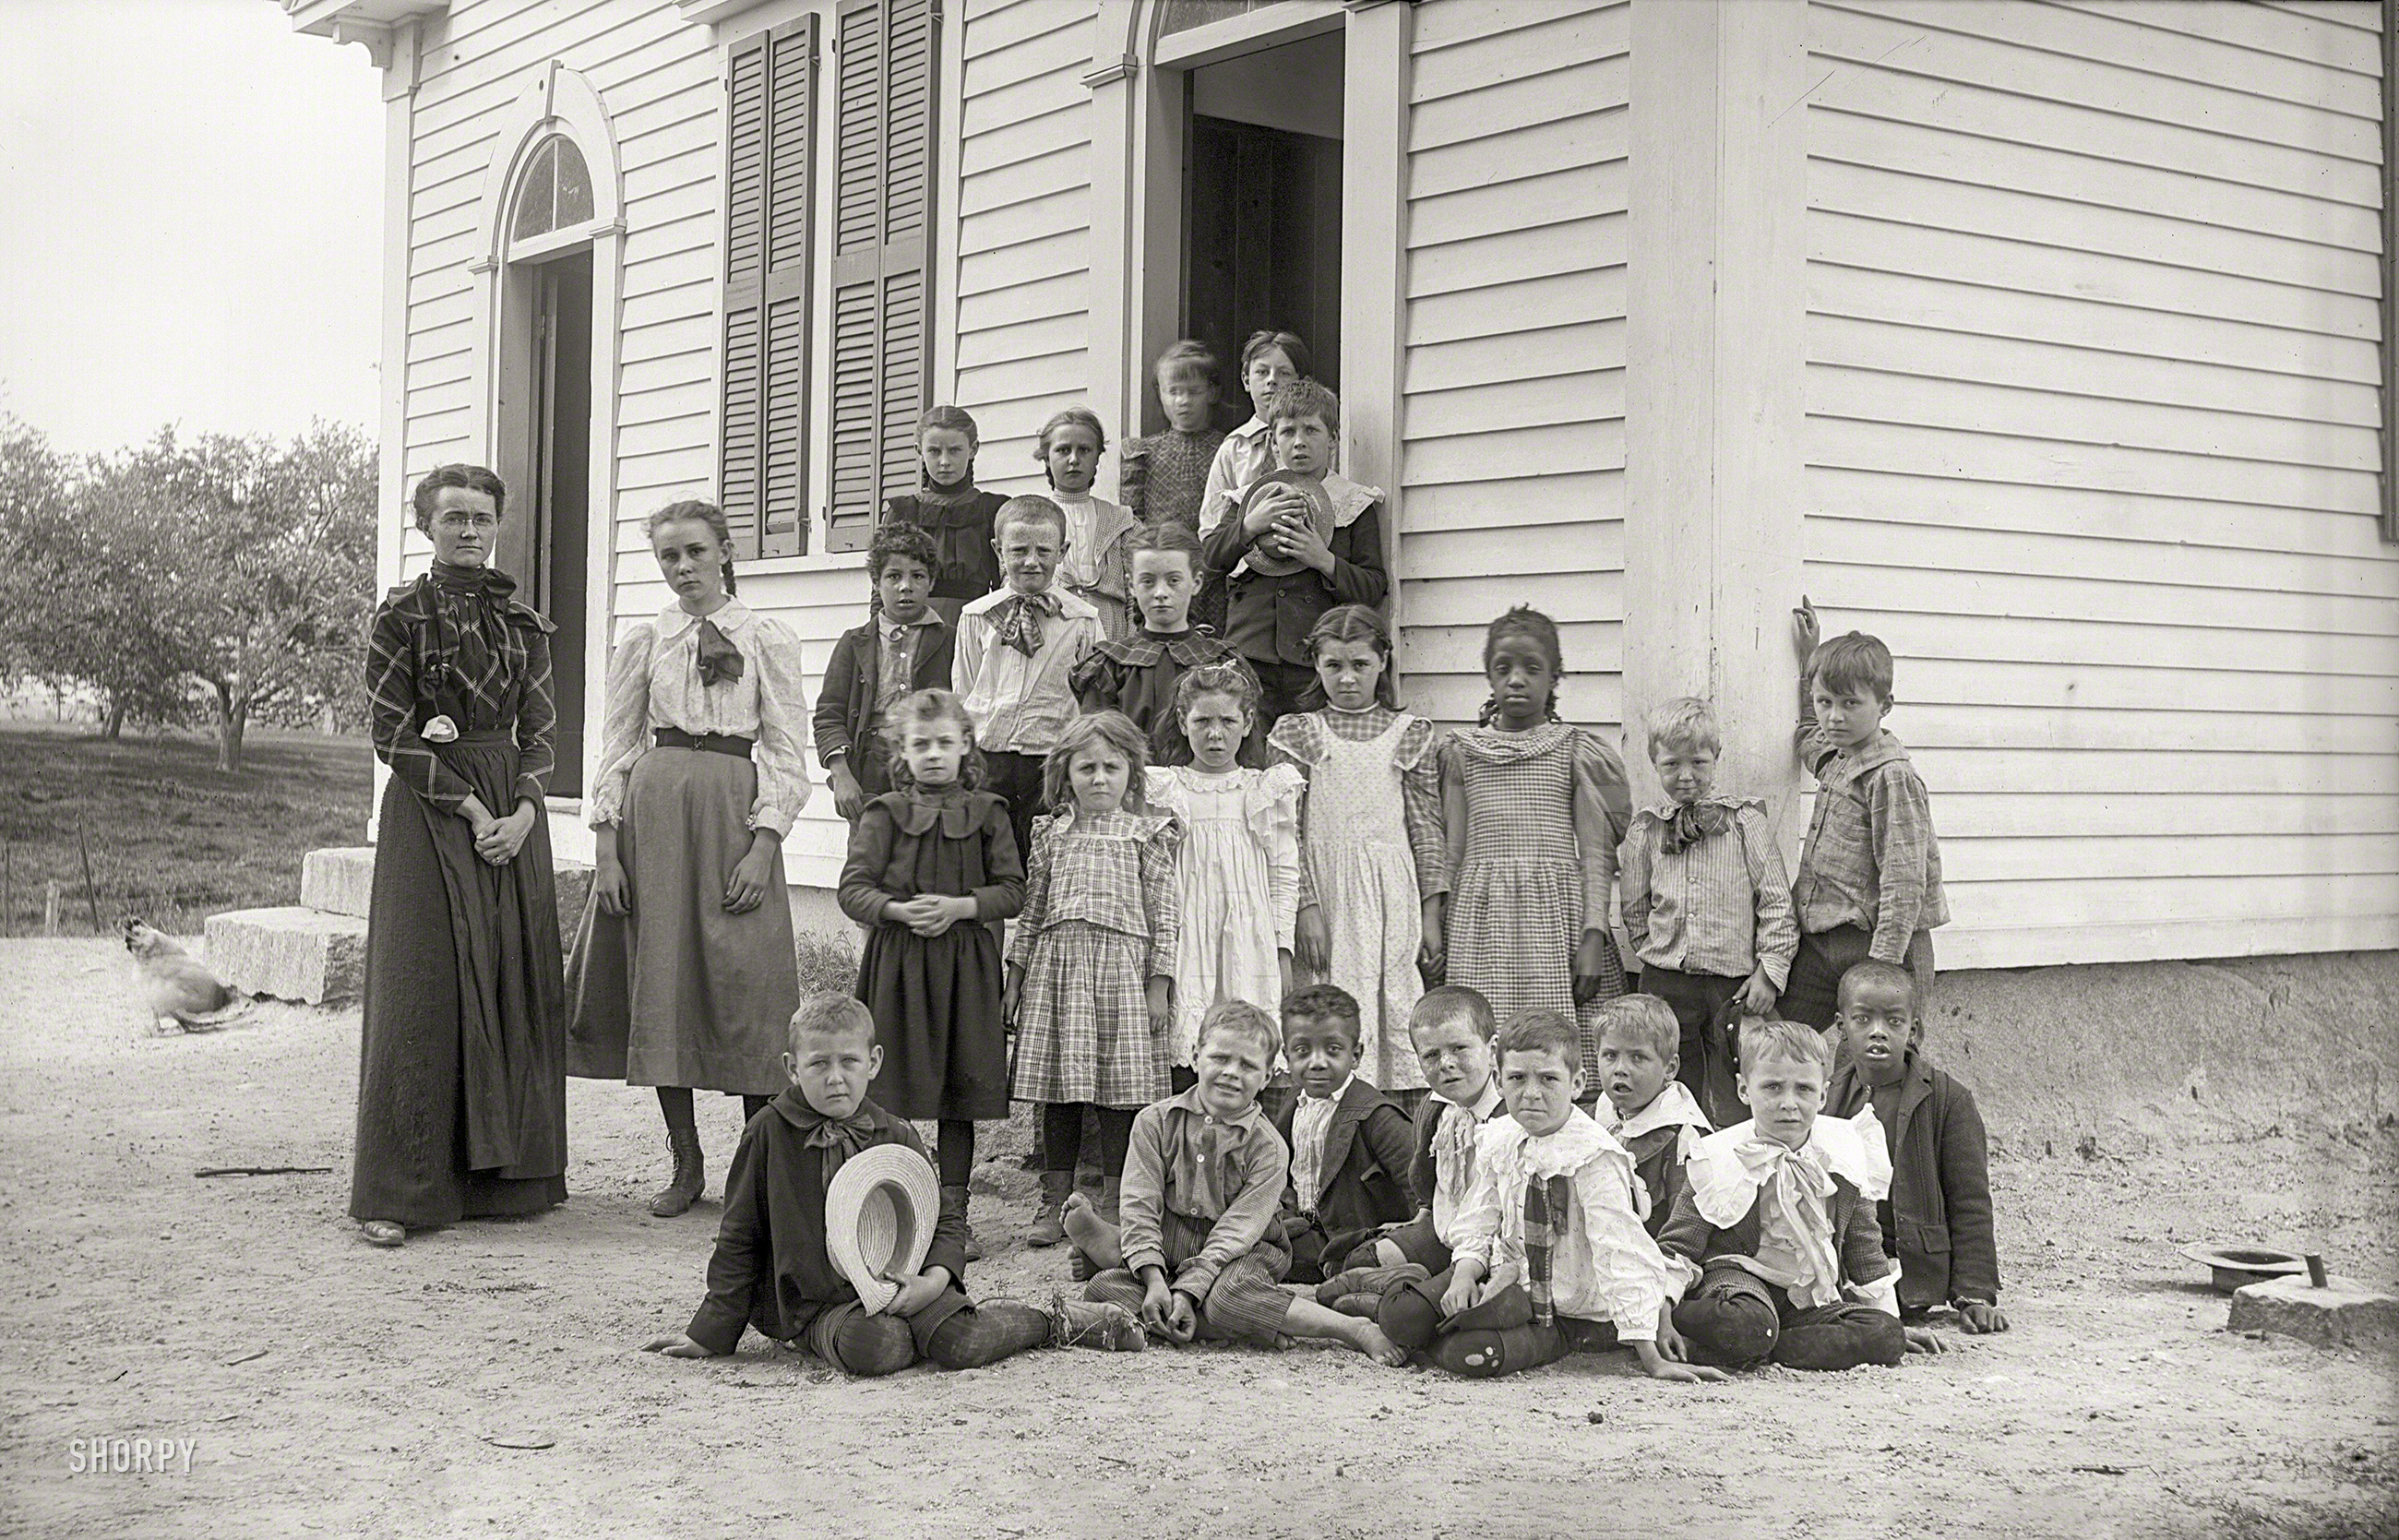 This just in from circa 1900 New England, the schoolmarm and her charges. And the schoolyard chicken. 5x8 dry plate glass negative. View full size.